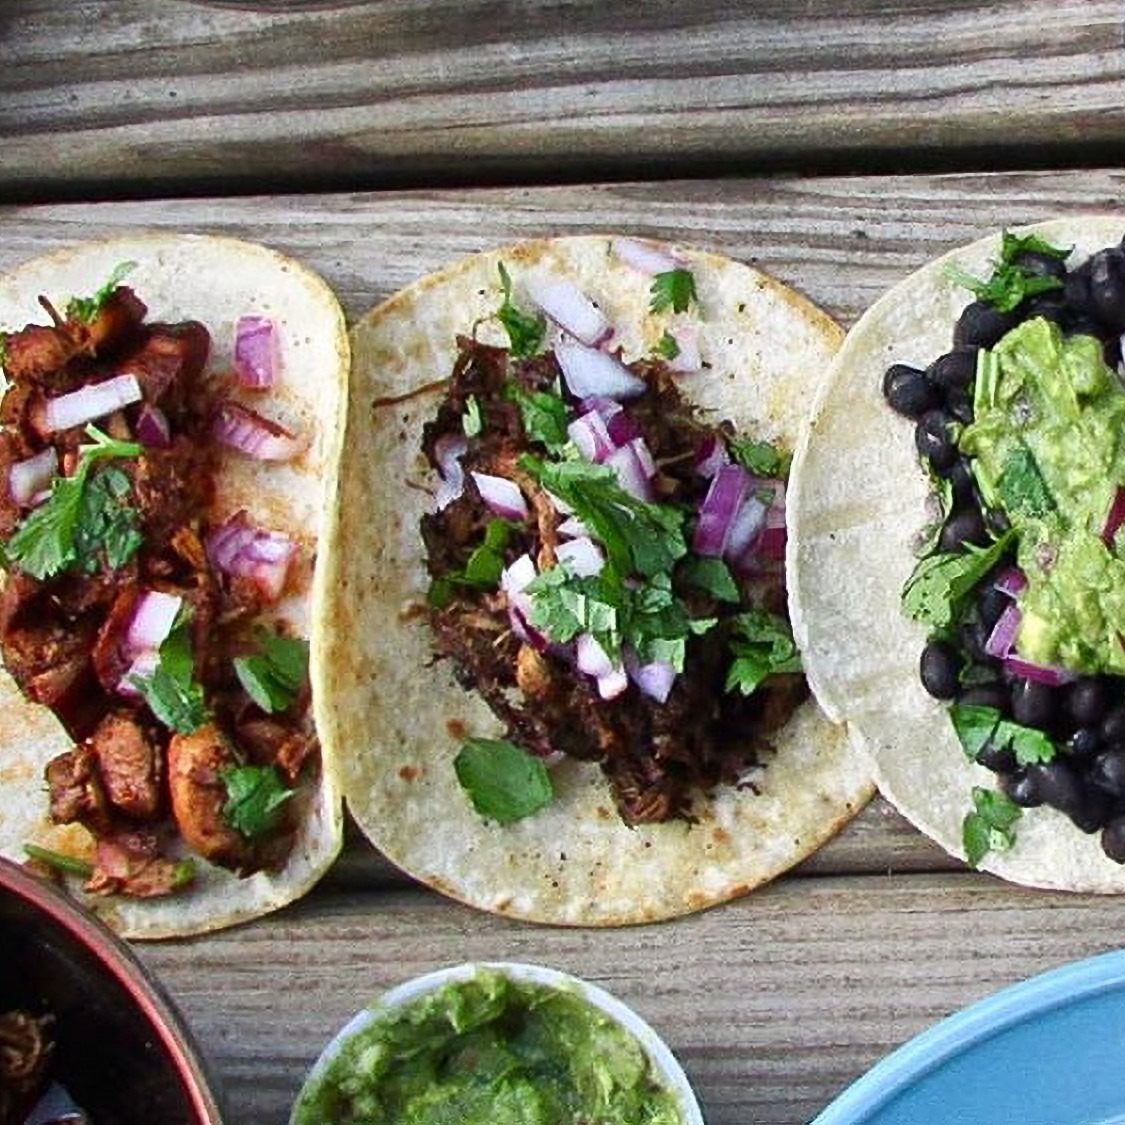 The image shows a group of tacos on a table from Dos Amigos food truck. The tacos seem to be a variety of Mexican and Tex-Mex food, including Korean taco, gringas, chalupa, and tostada. Ingredients like guacamole, leaf vegetables, and corn tortillas are also included.